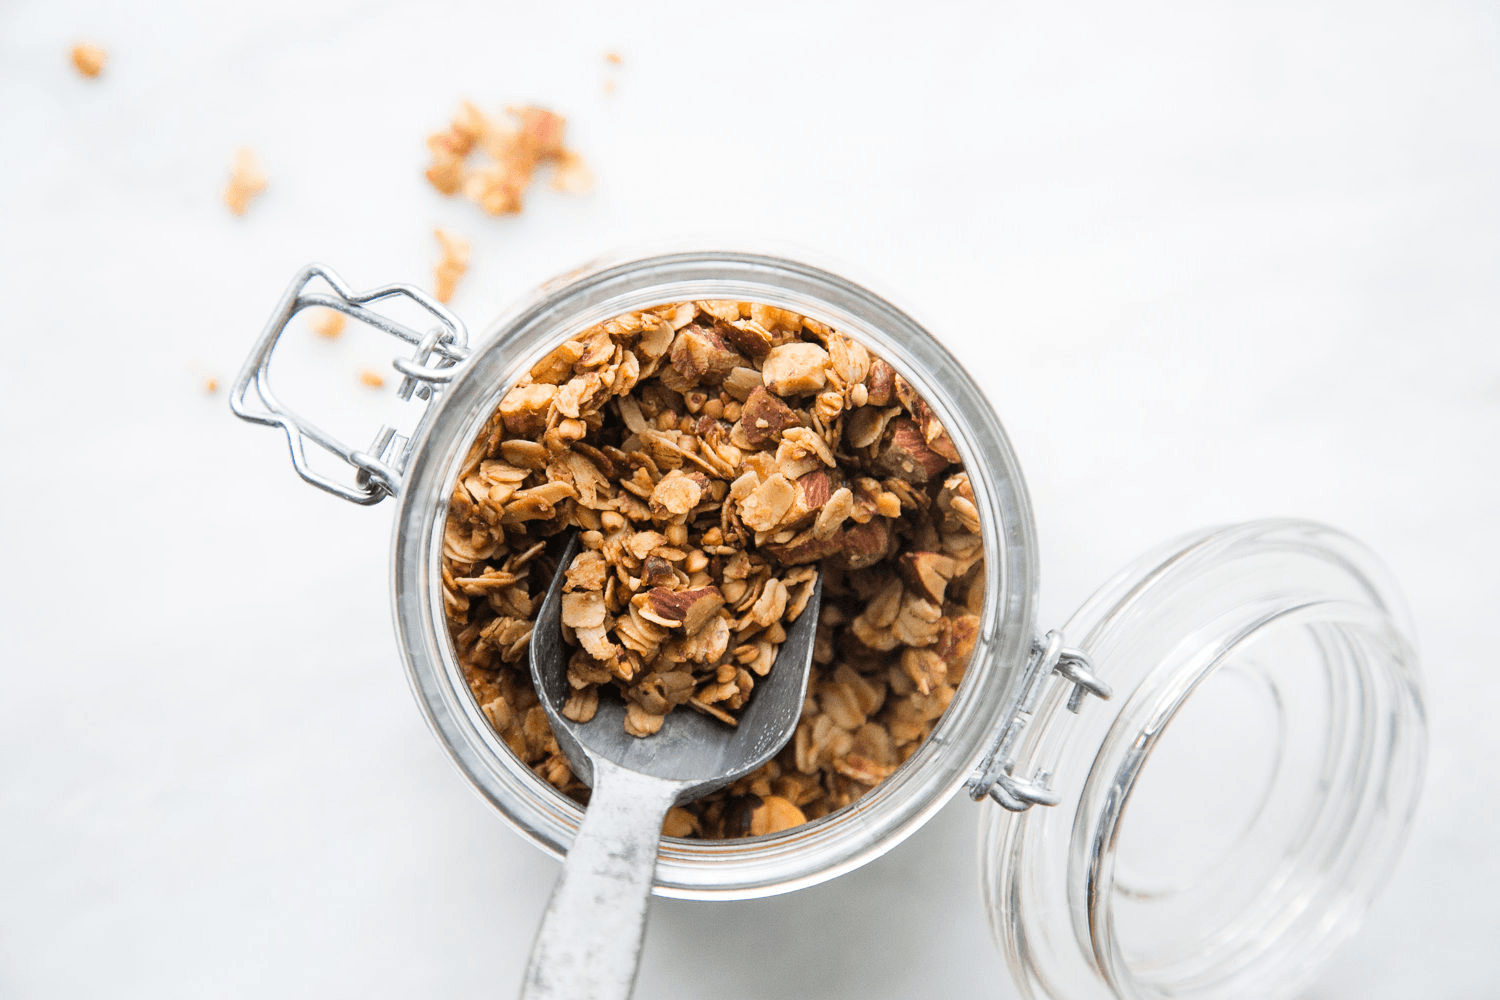 Aerial view of savoury granola in a glass mason jar with a silver spoon, and some granola scattered around on a white background.